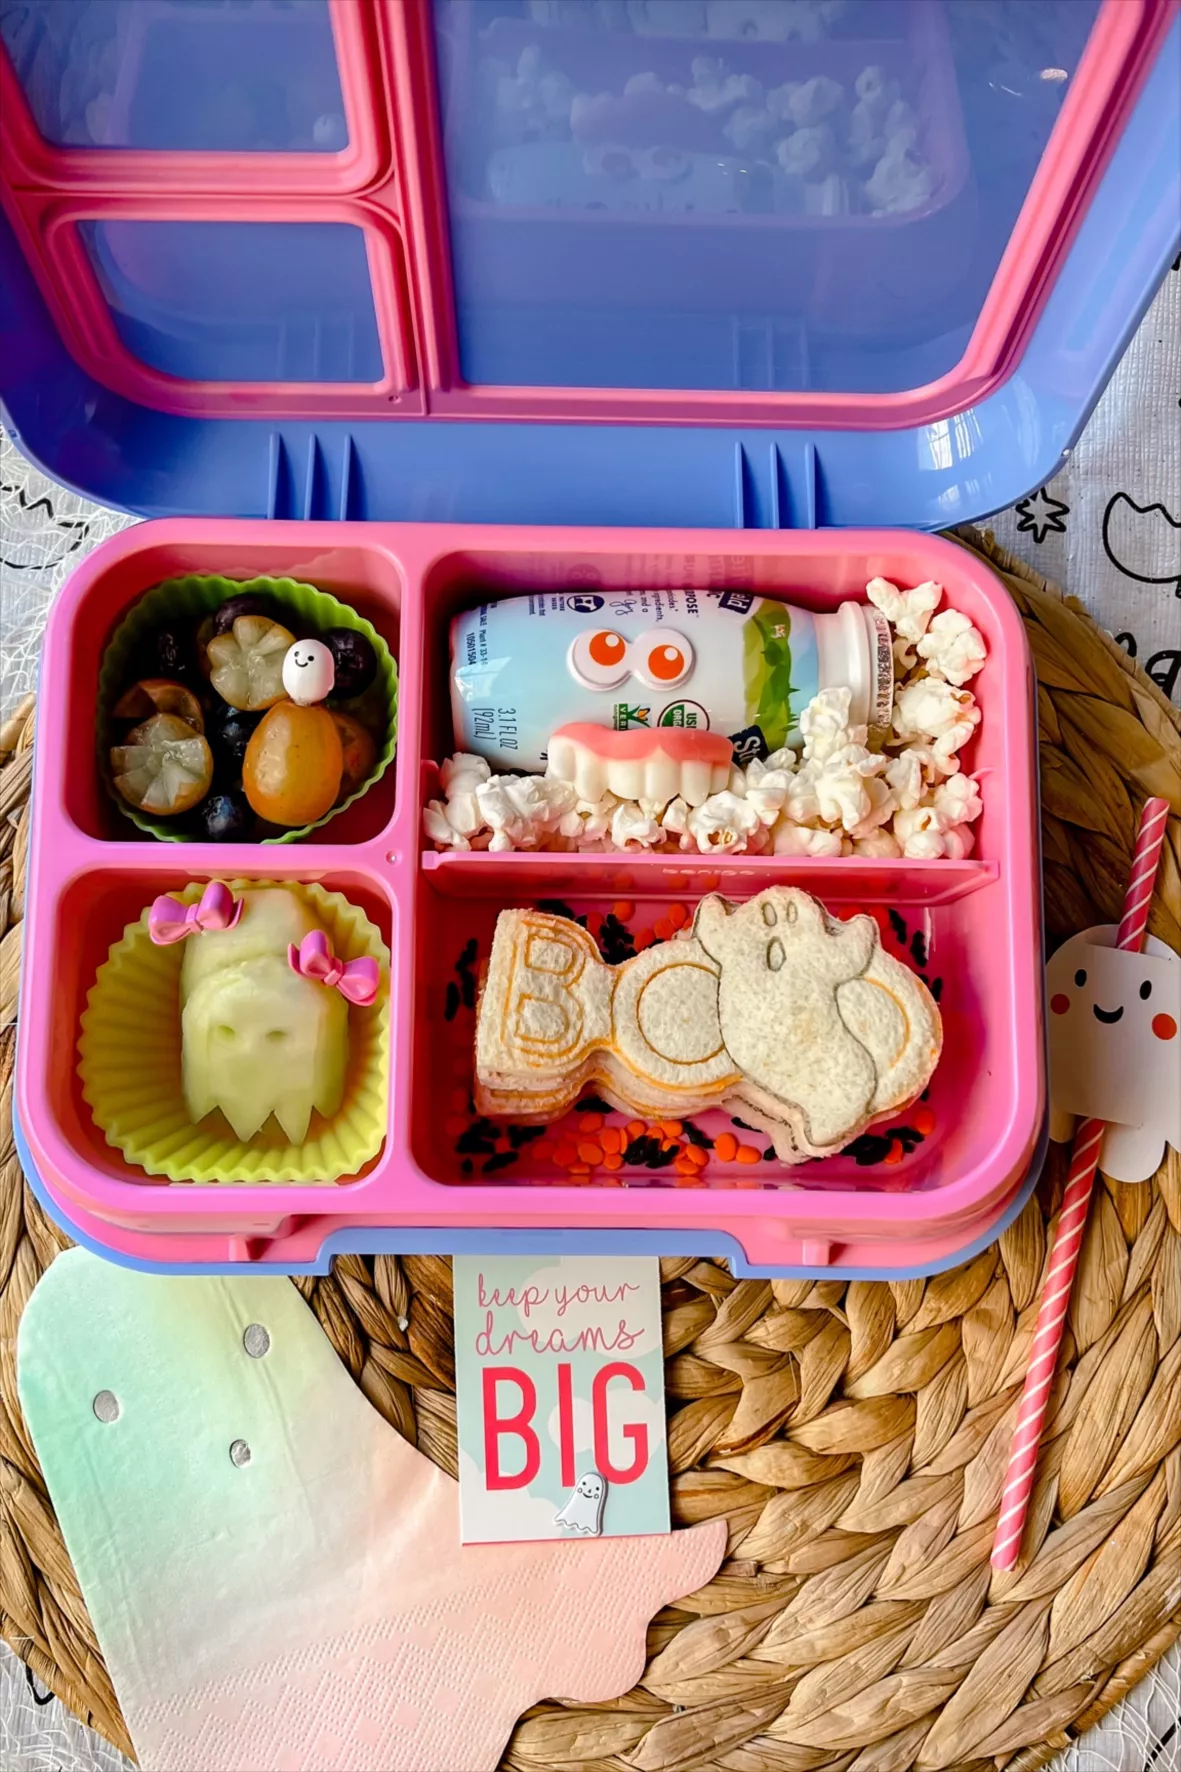 Cute Pig Bento Lunch for Kids - Life on Manitoulin